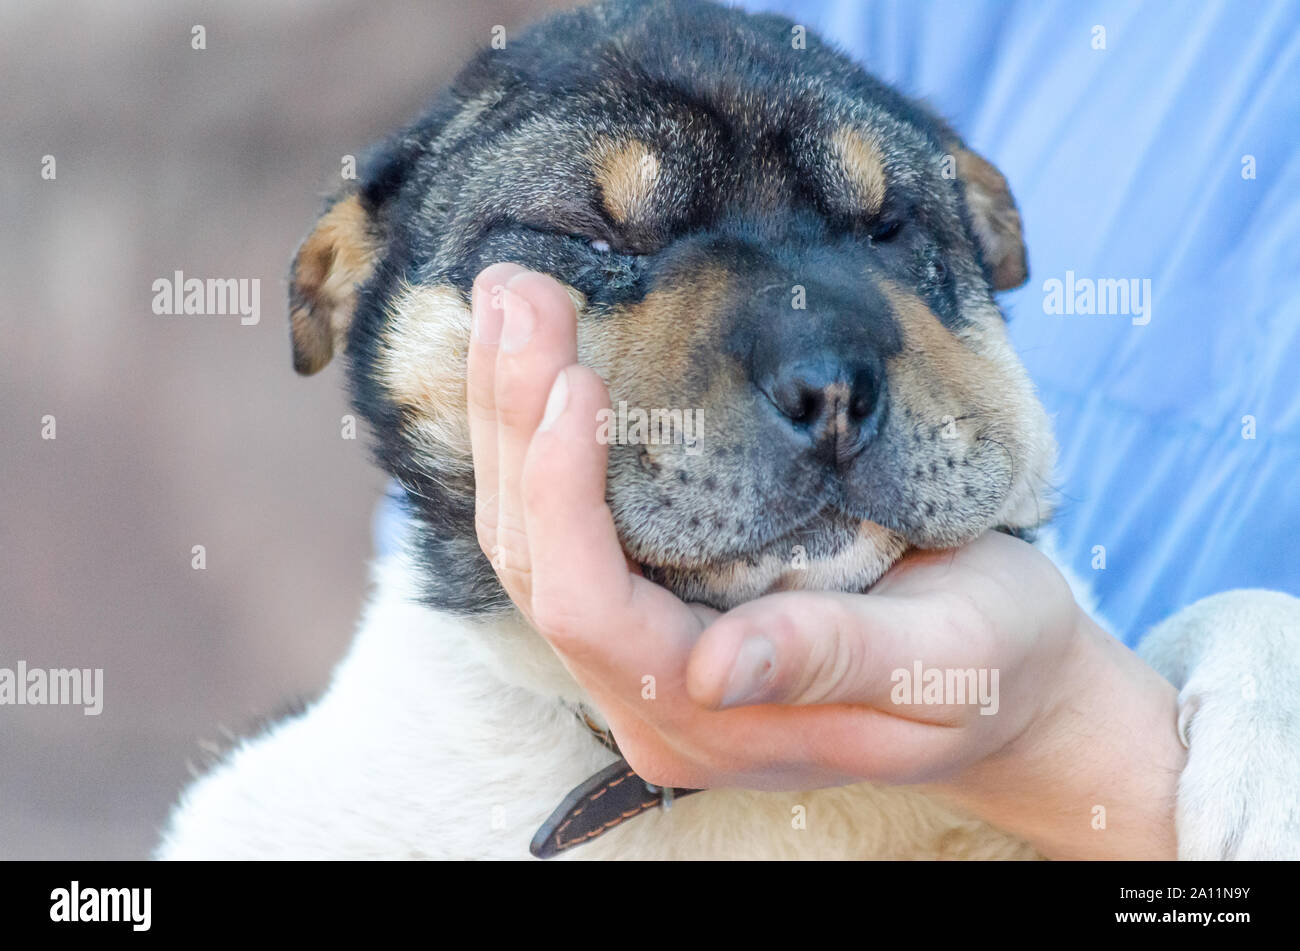 man's palm holds muzzle of half-breed Shar Pei puppy Stock Photo